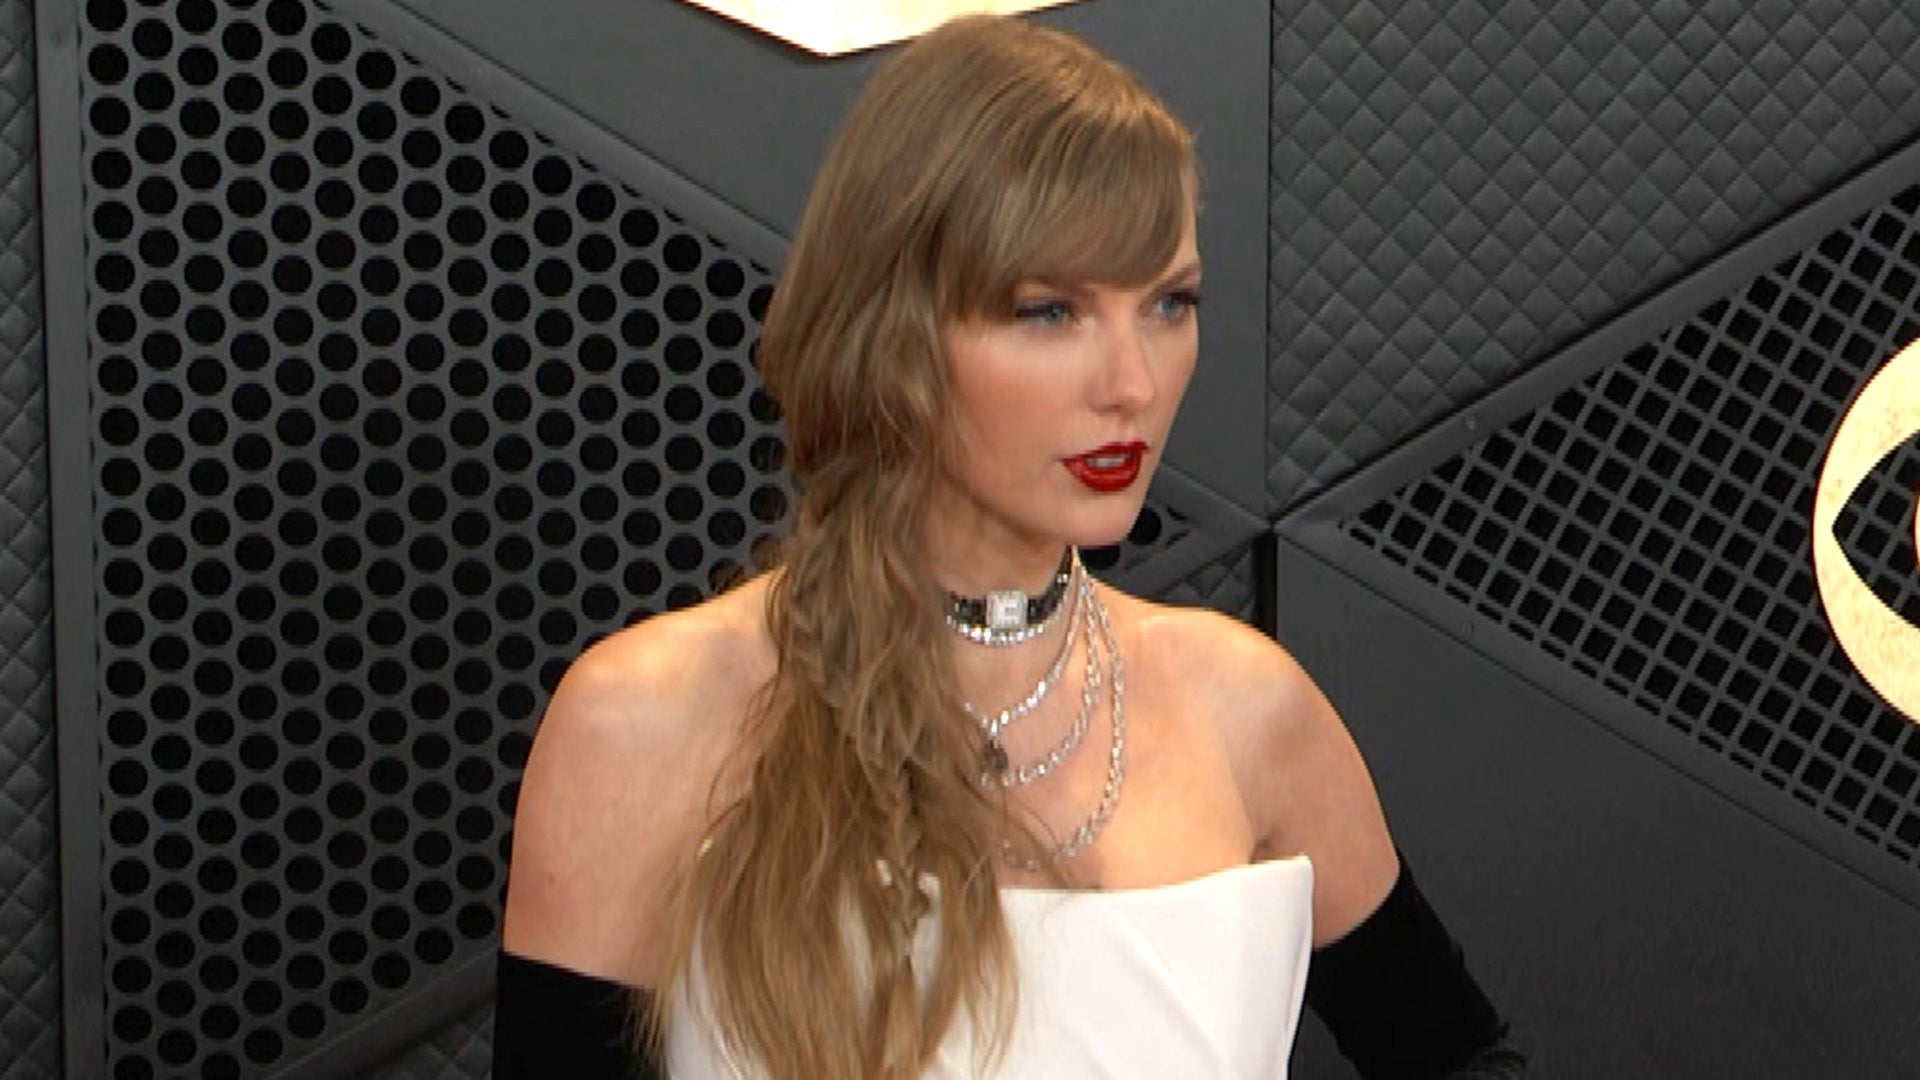 GRAMMYs: Taylor Swift Brings Old Hollywood Glam!